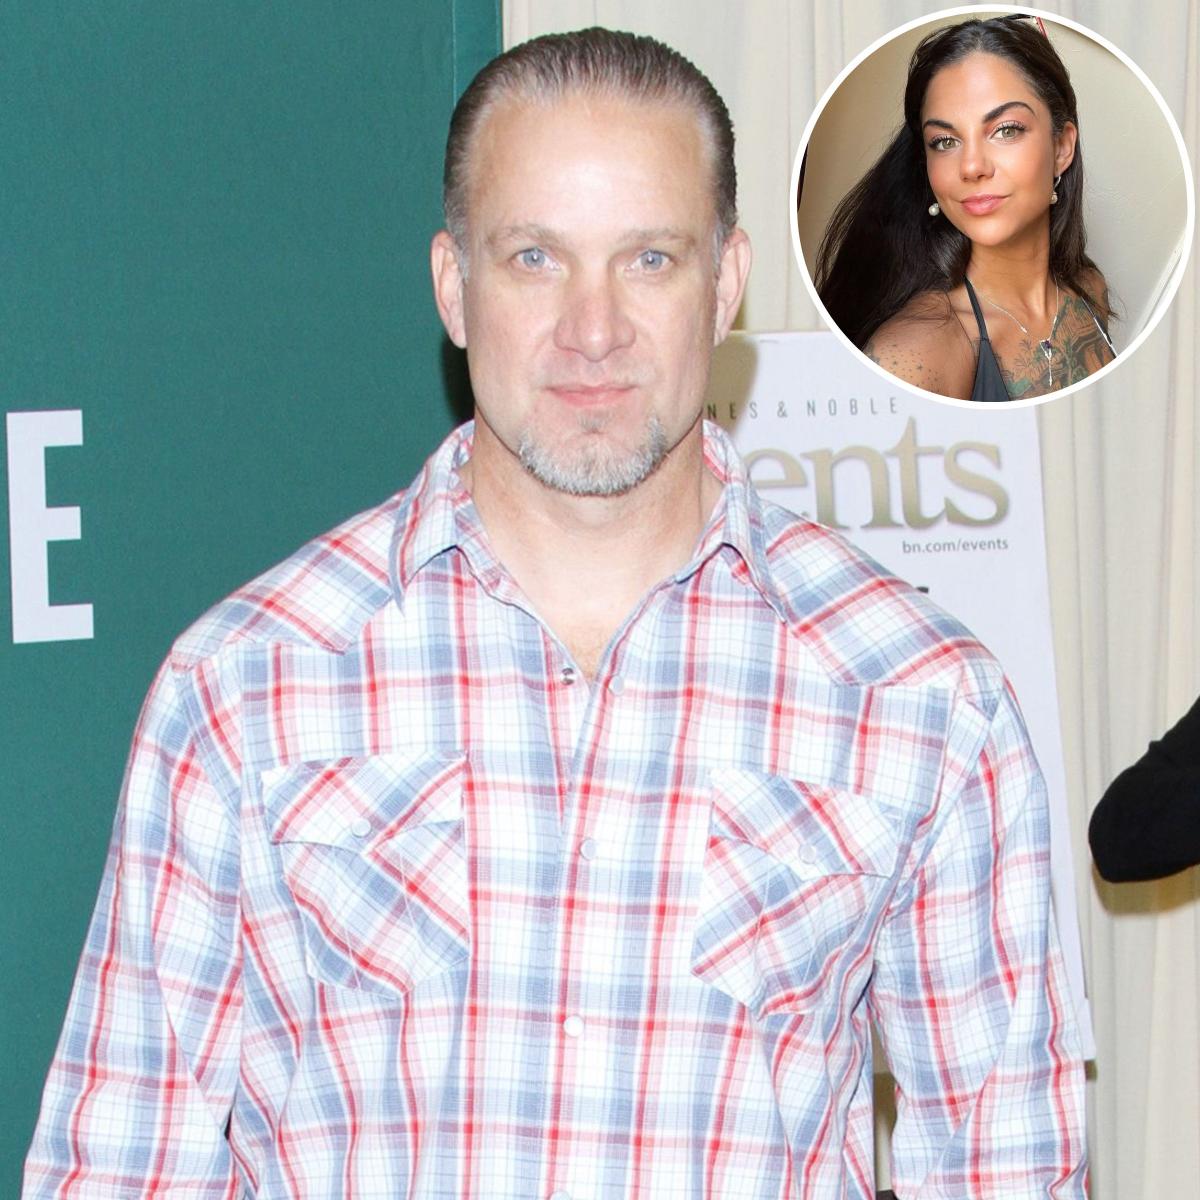 Jesse James Pregnant Wife Bonnie Rotten Accuses Him of Cheating Her Statement, His Response, More picture